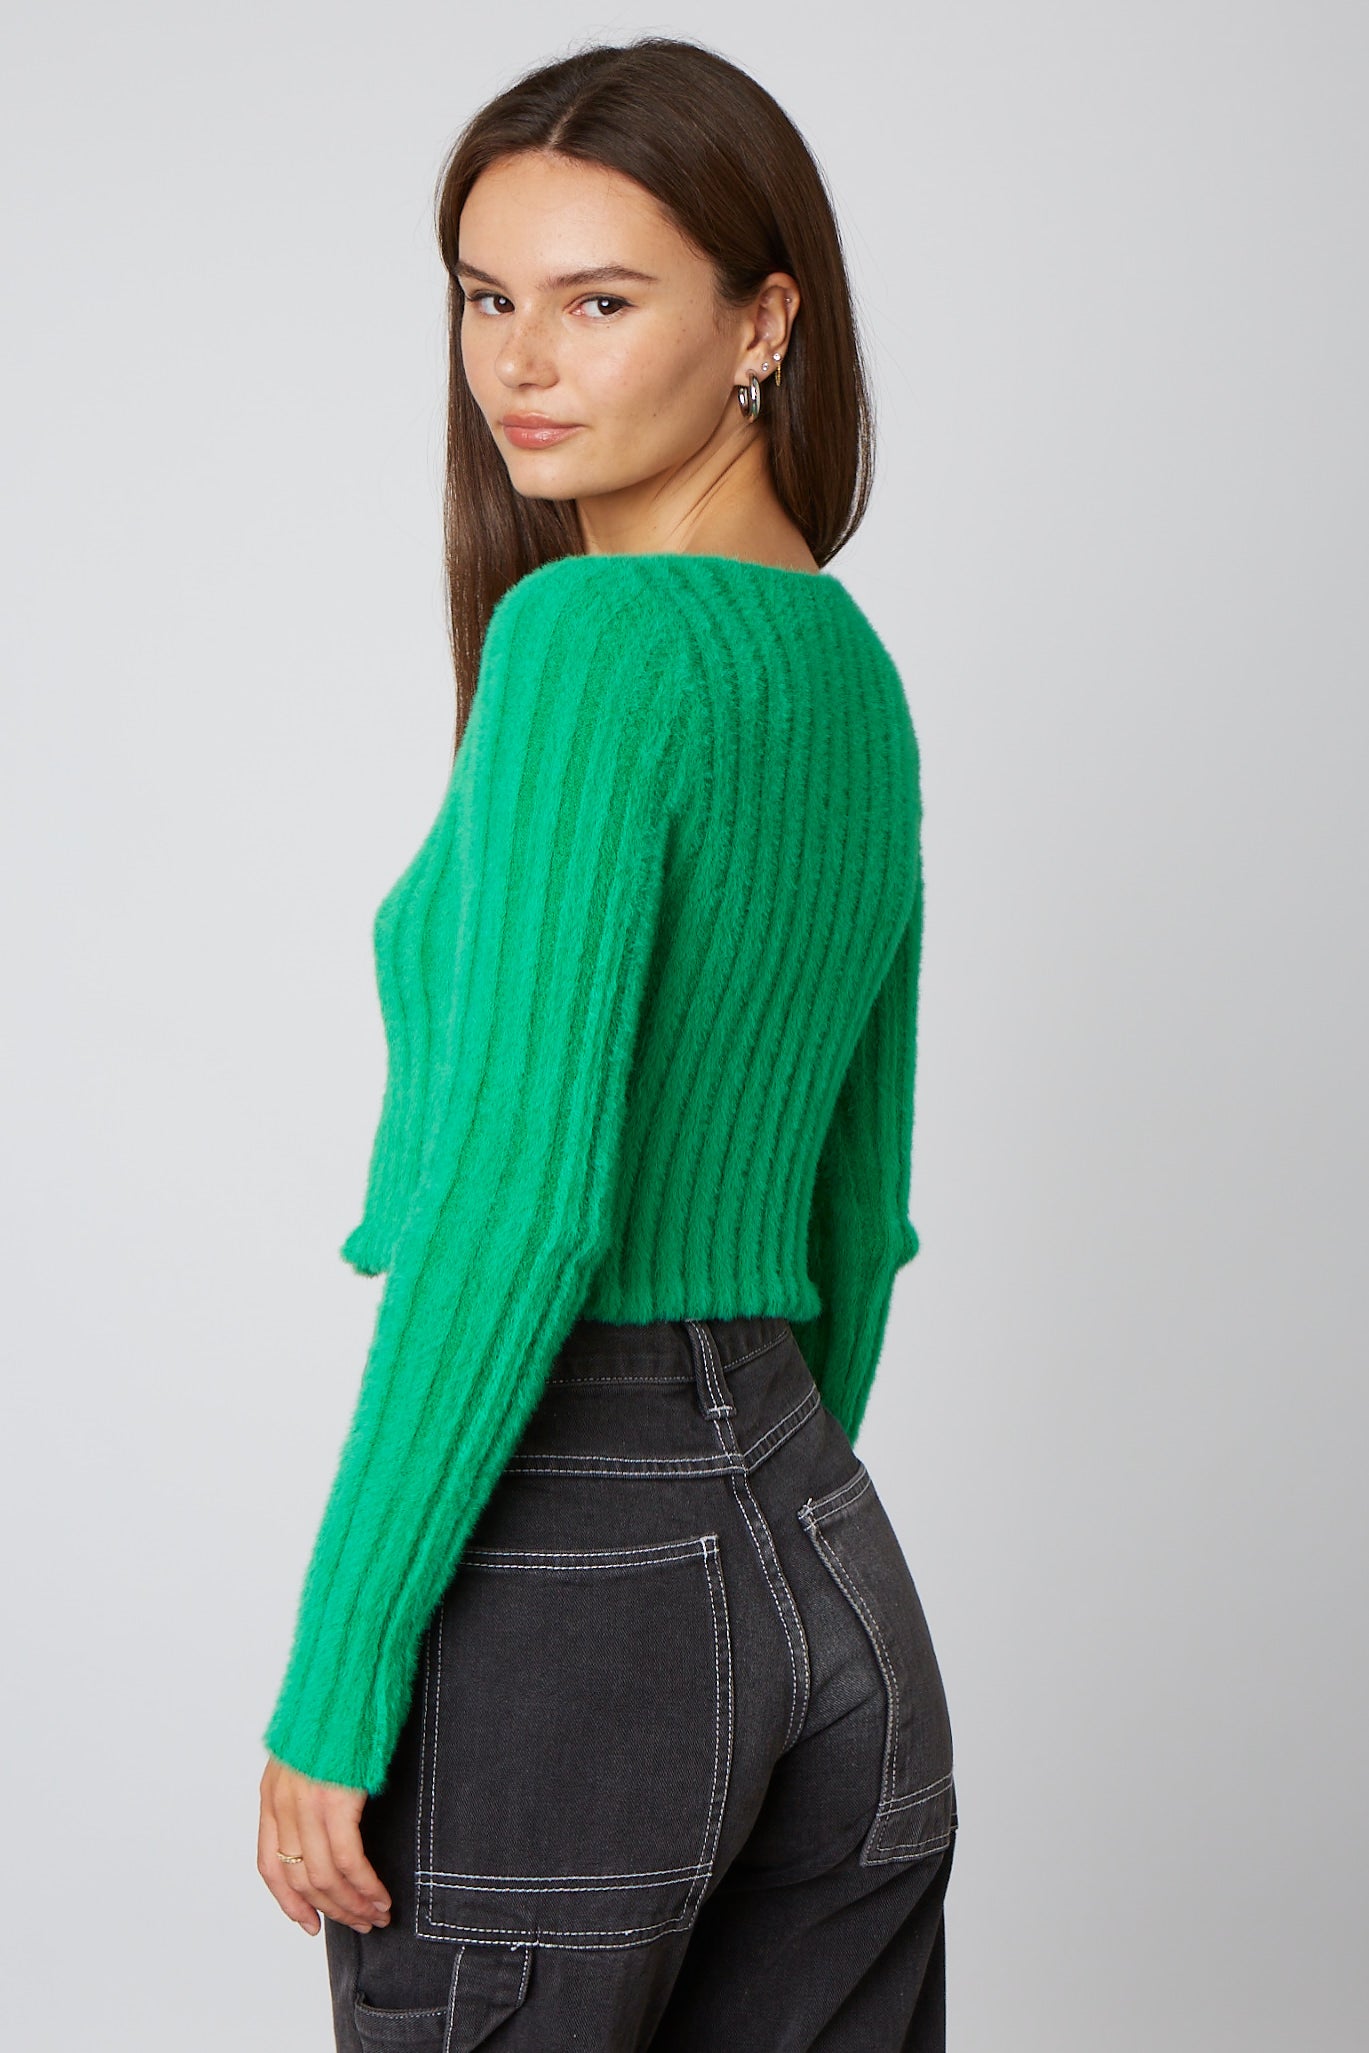 Chenille Chainlink Cardigan in Kelly Green Back View